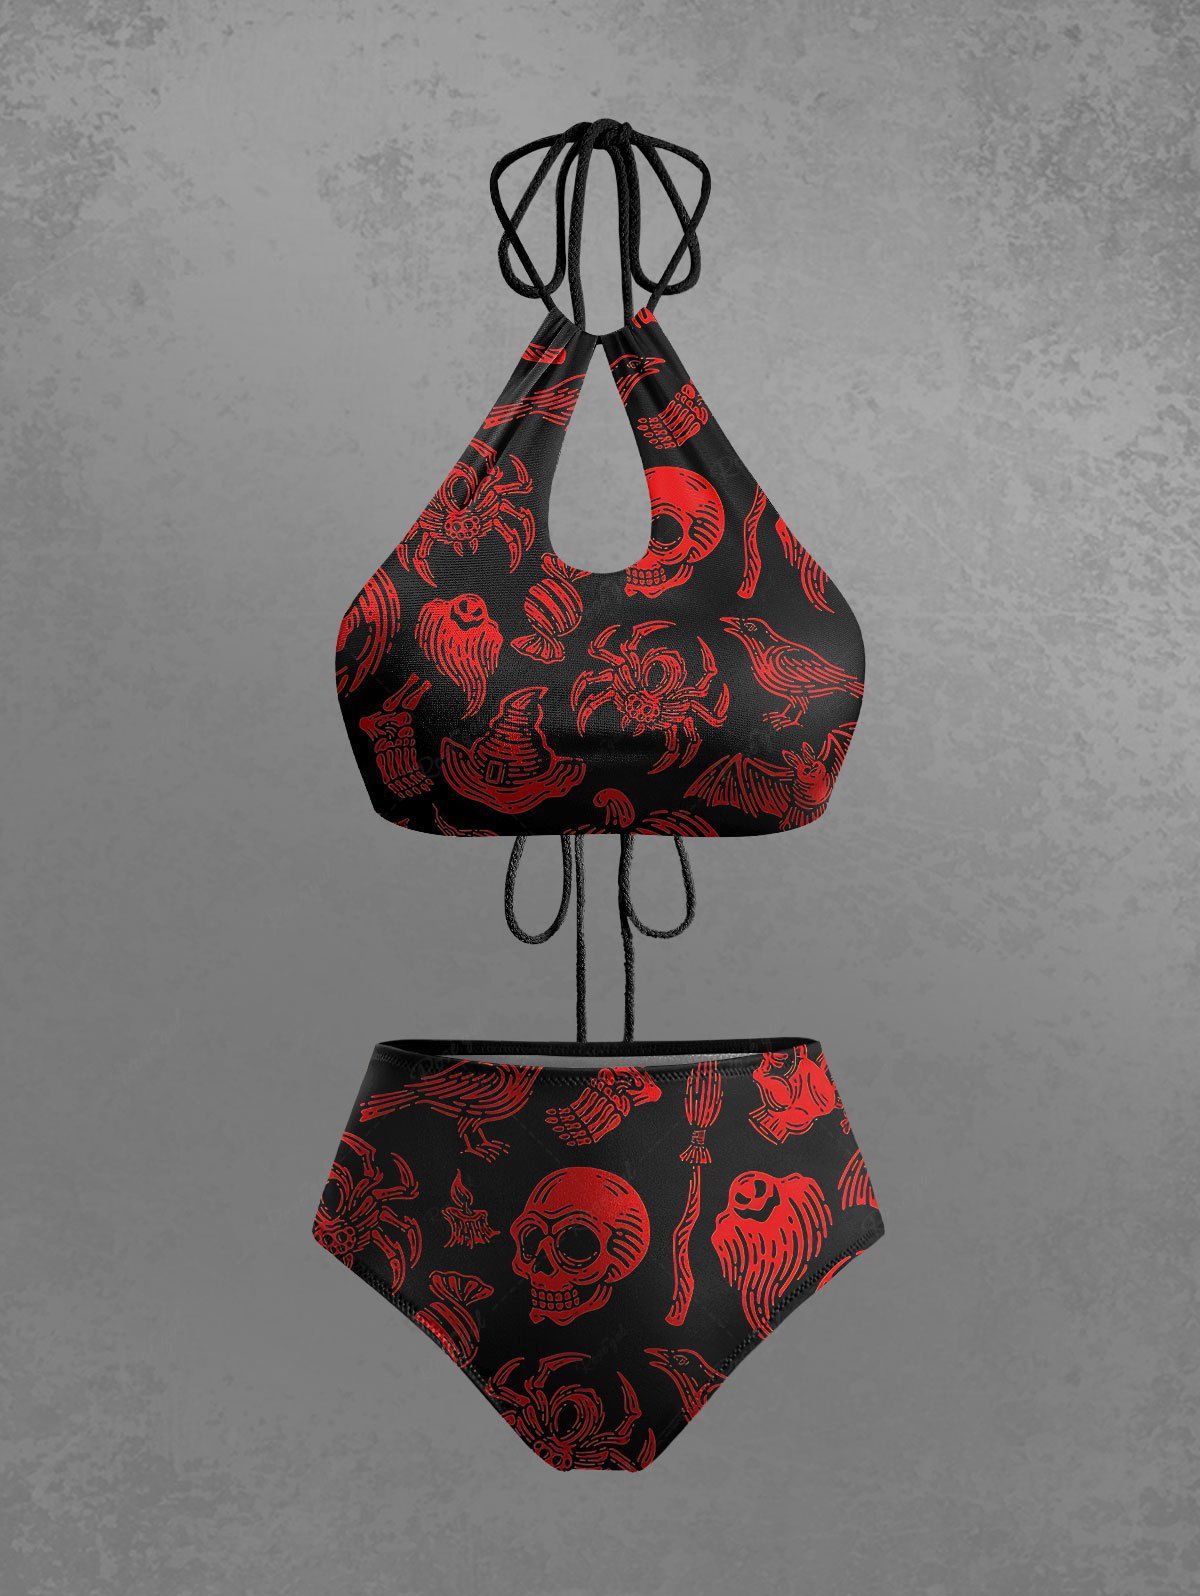 Gothic Skull Scorpion Candy Ghost Print Hollow Out Halter Backless Bikini Set